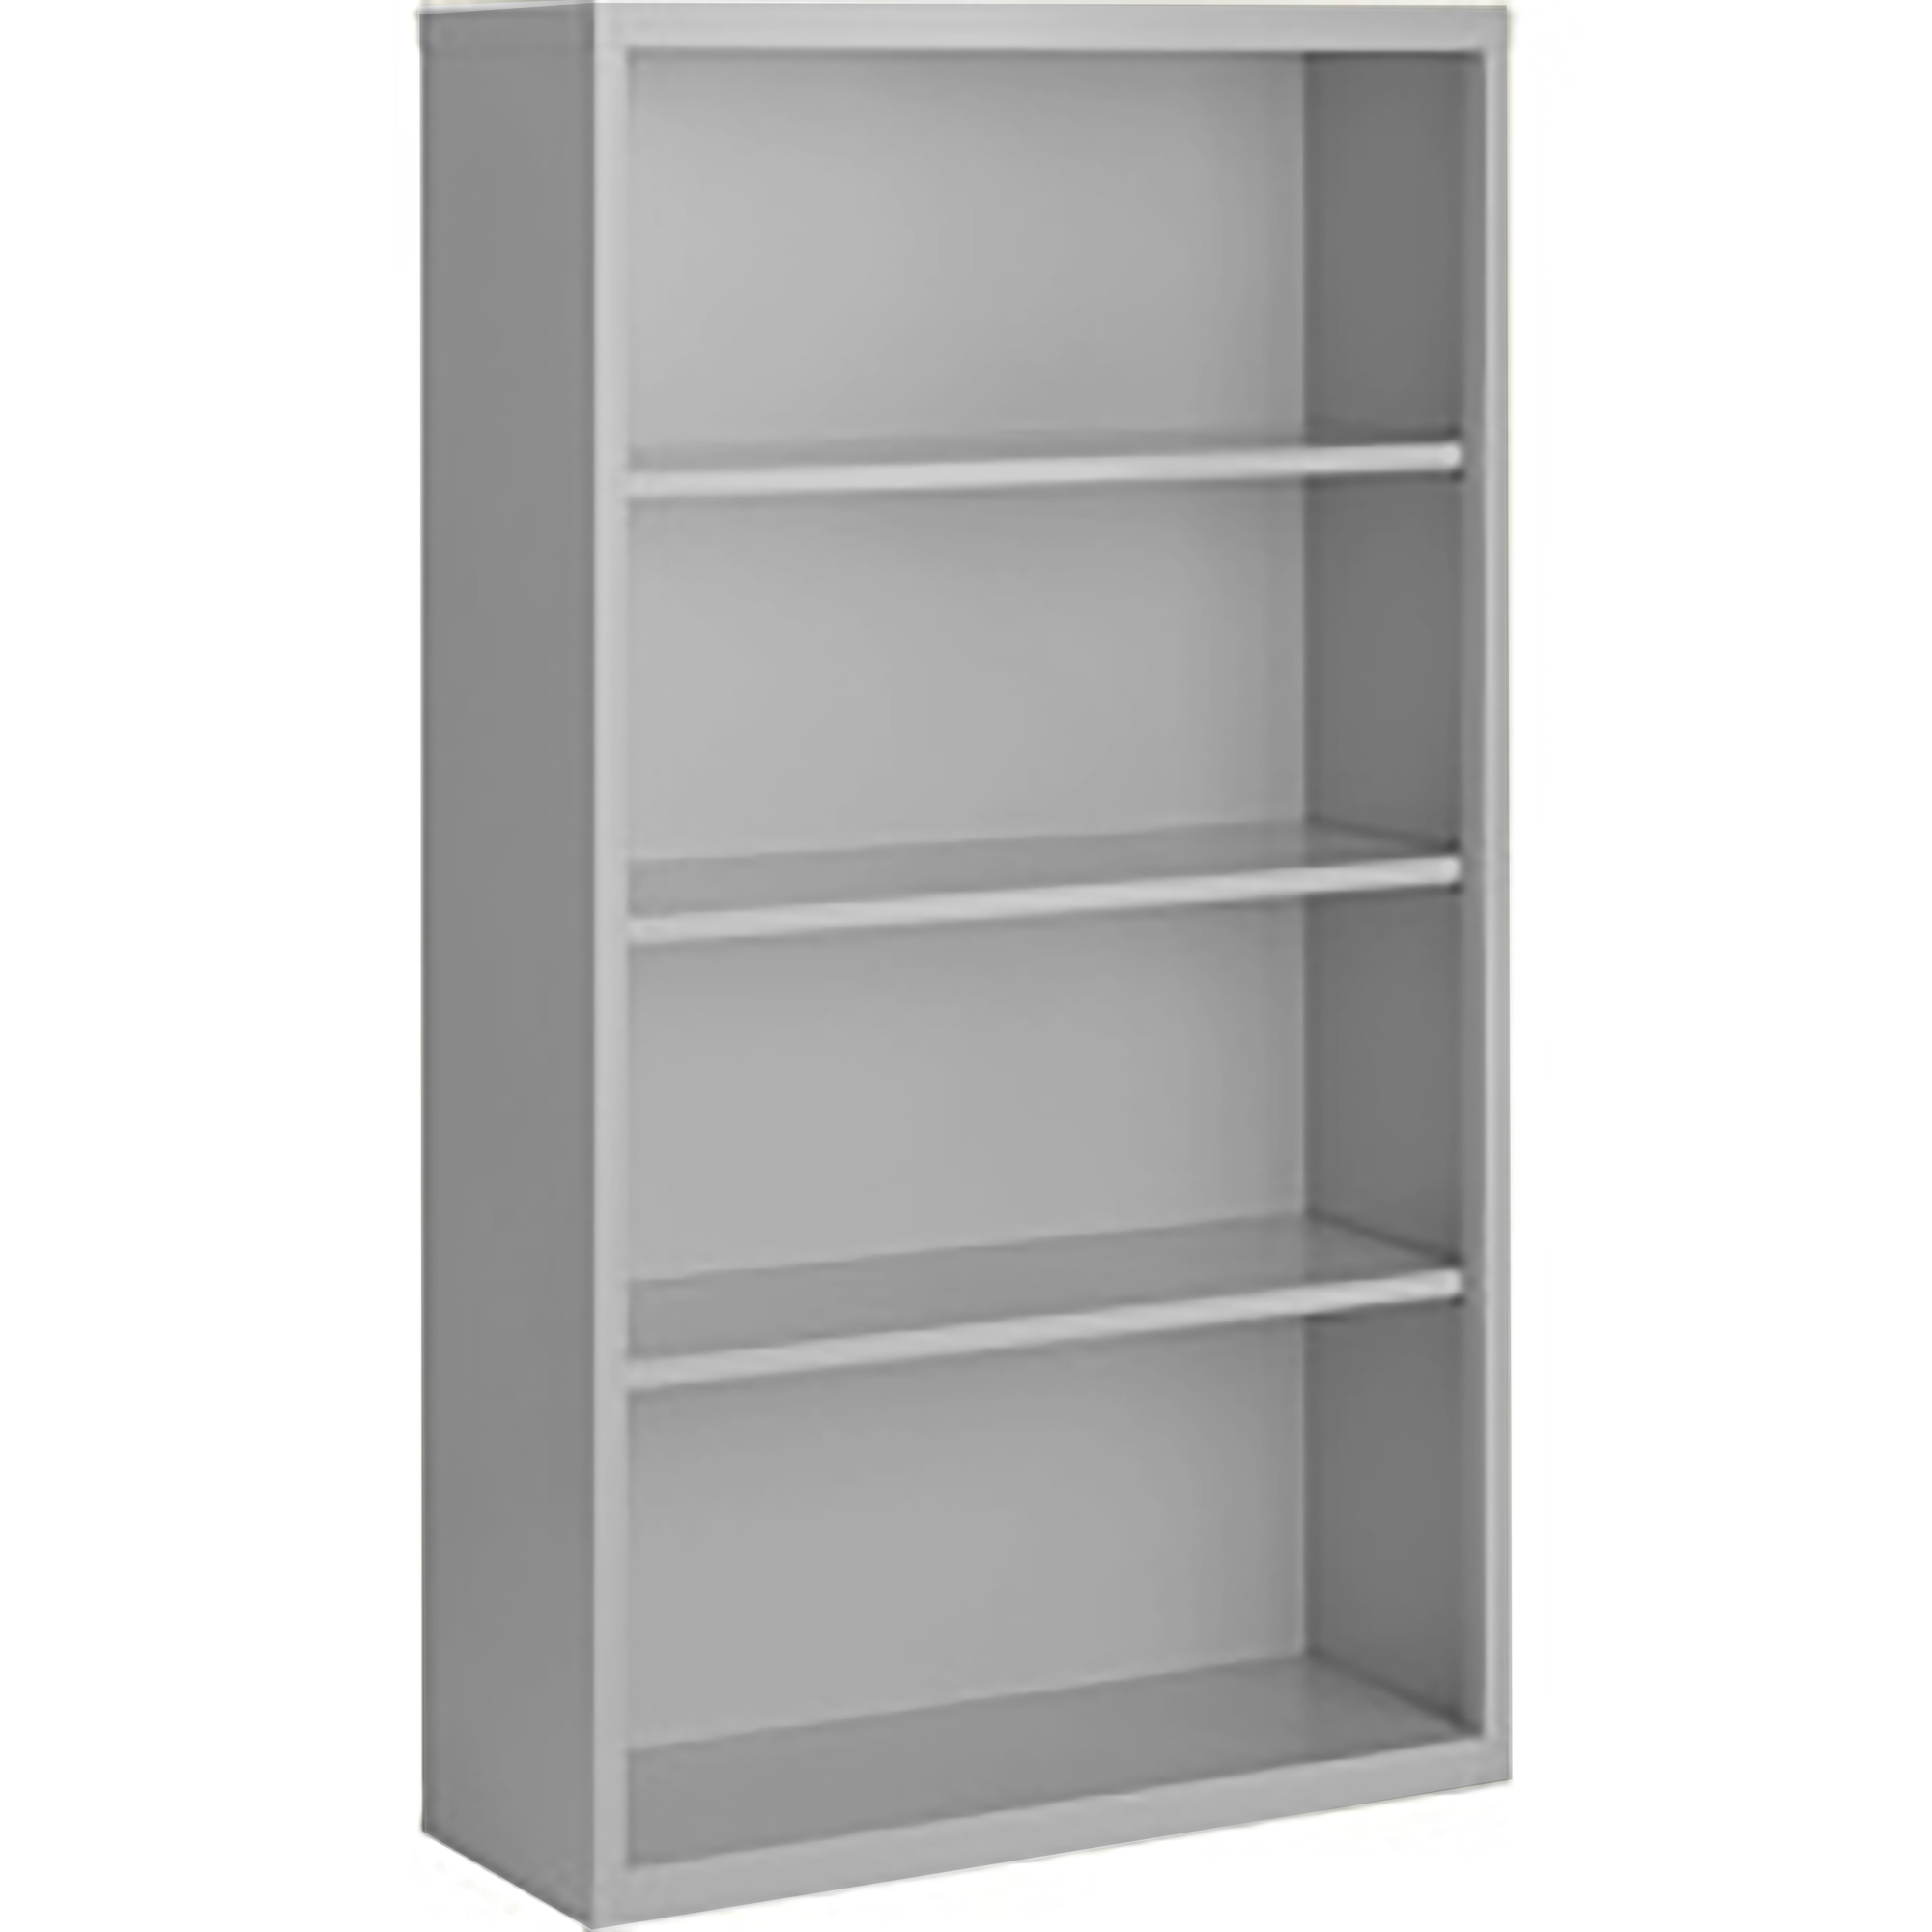 Steel Cabinets USA, 36Inchx18Inchx60Inch Gray Bookcase Steel Fully Assembled, Height 60 in, Shelves (qty.) 4, Material Steel, Model BCA-366018-G